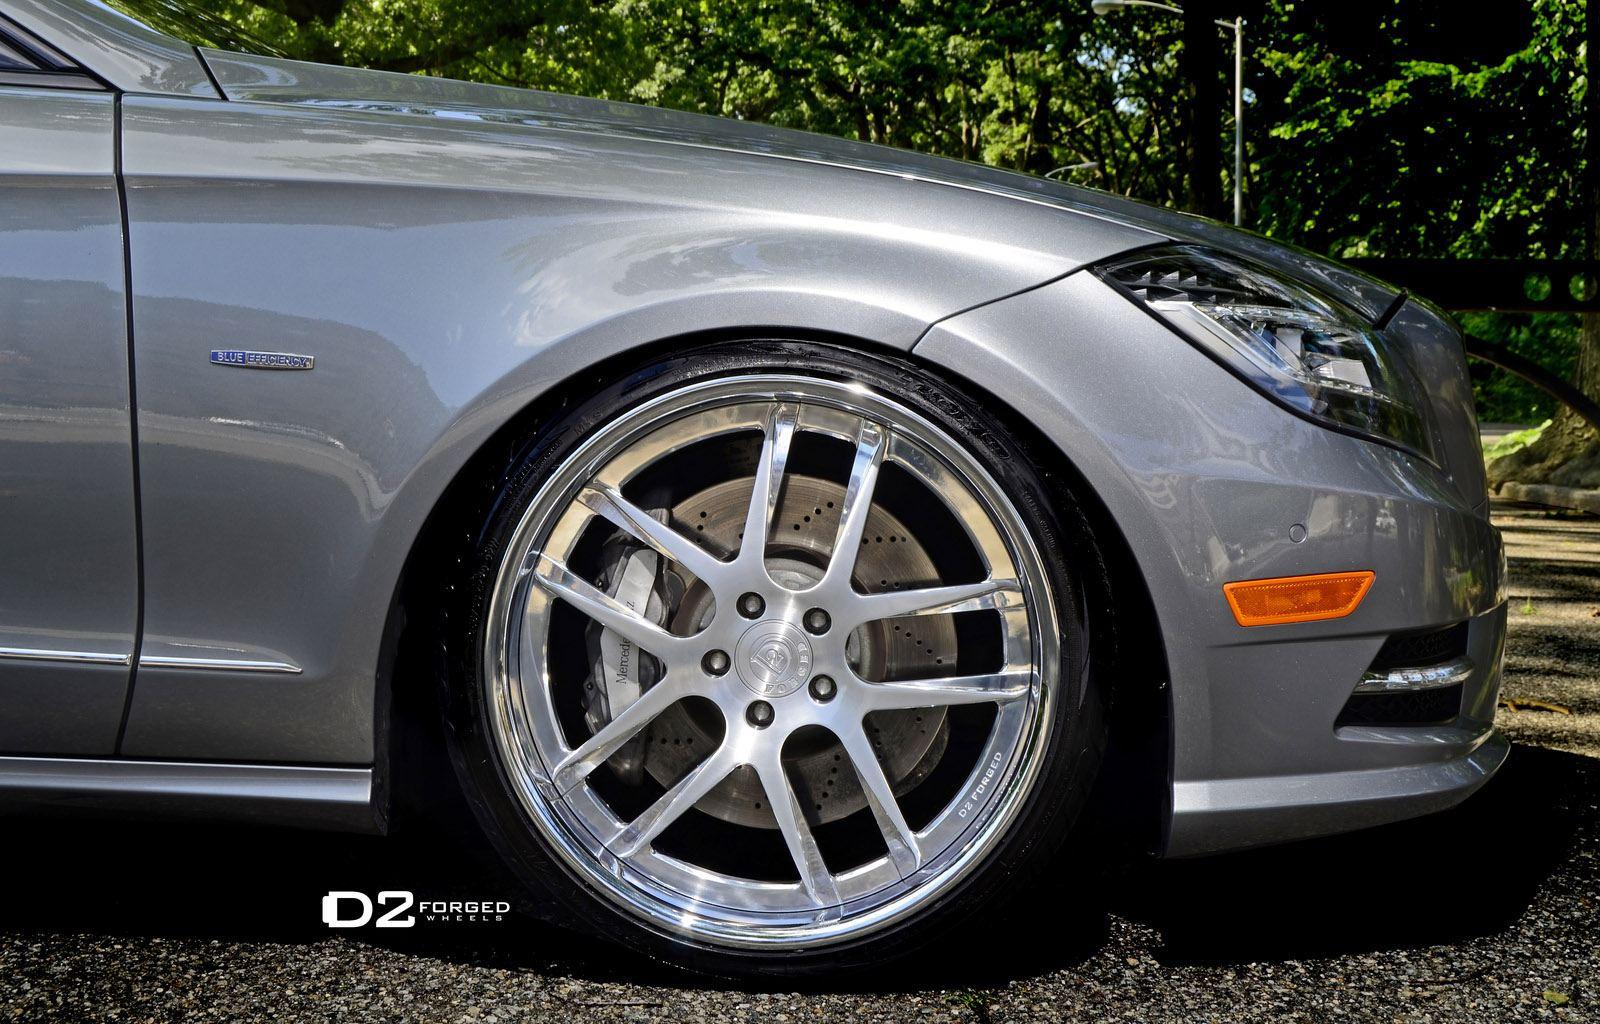 Mercedes Benz CLS 550 FMS08 By D2Forged Wheels Wallpaper